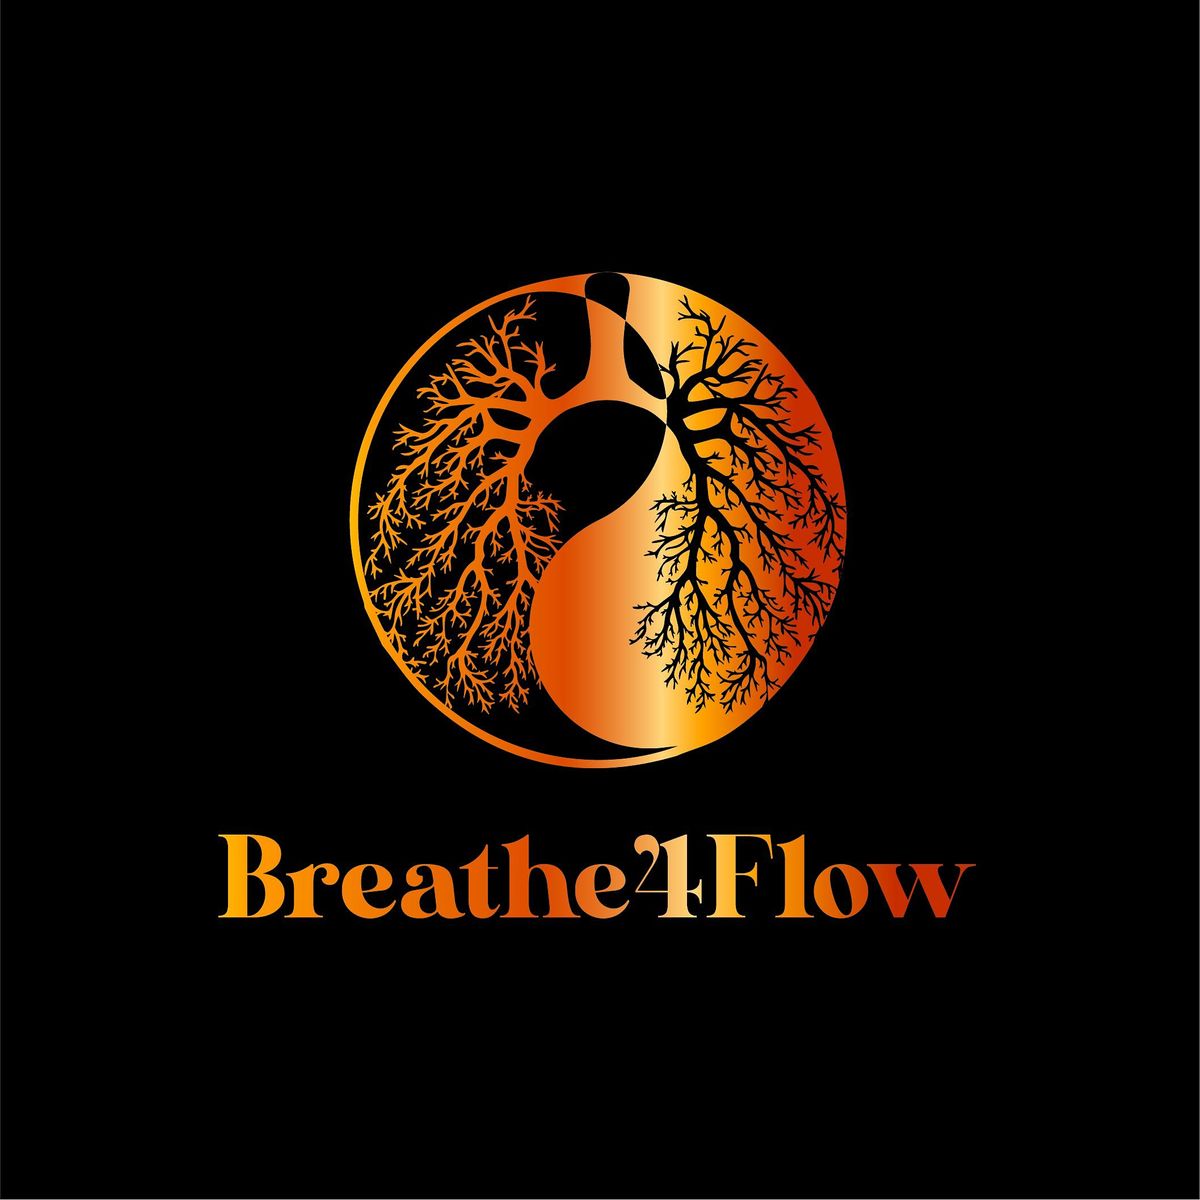 Power of breath Tuesday evenings